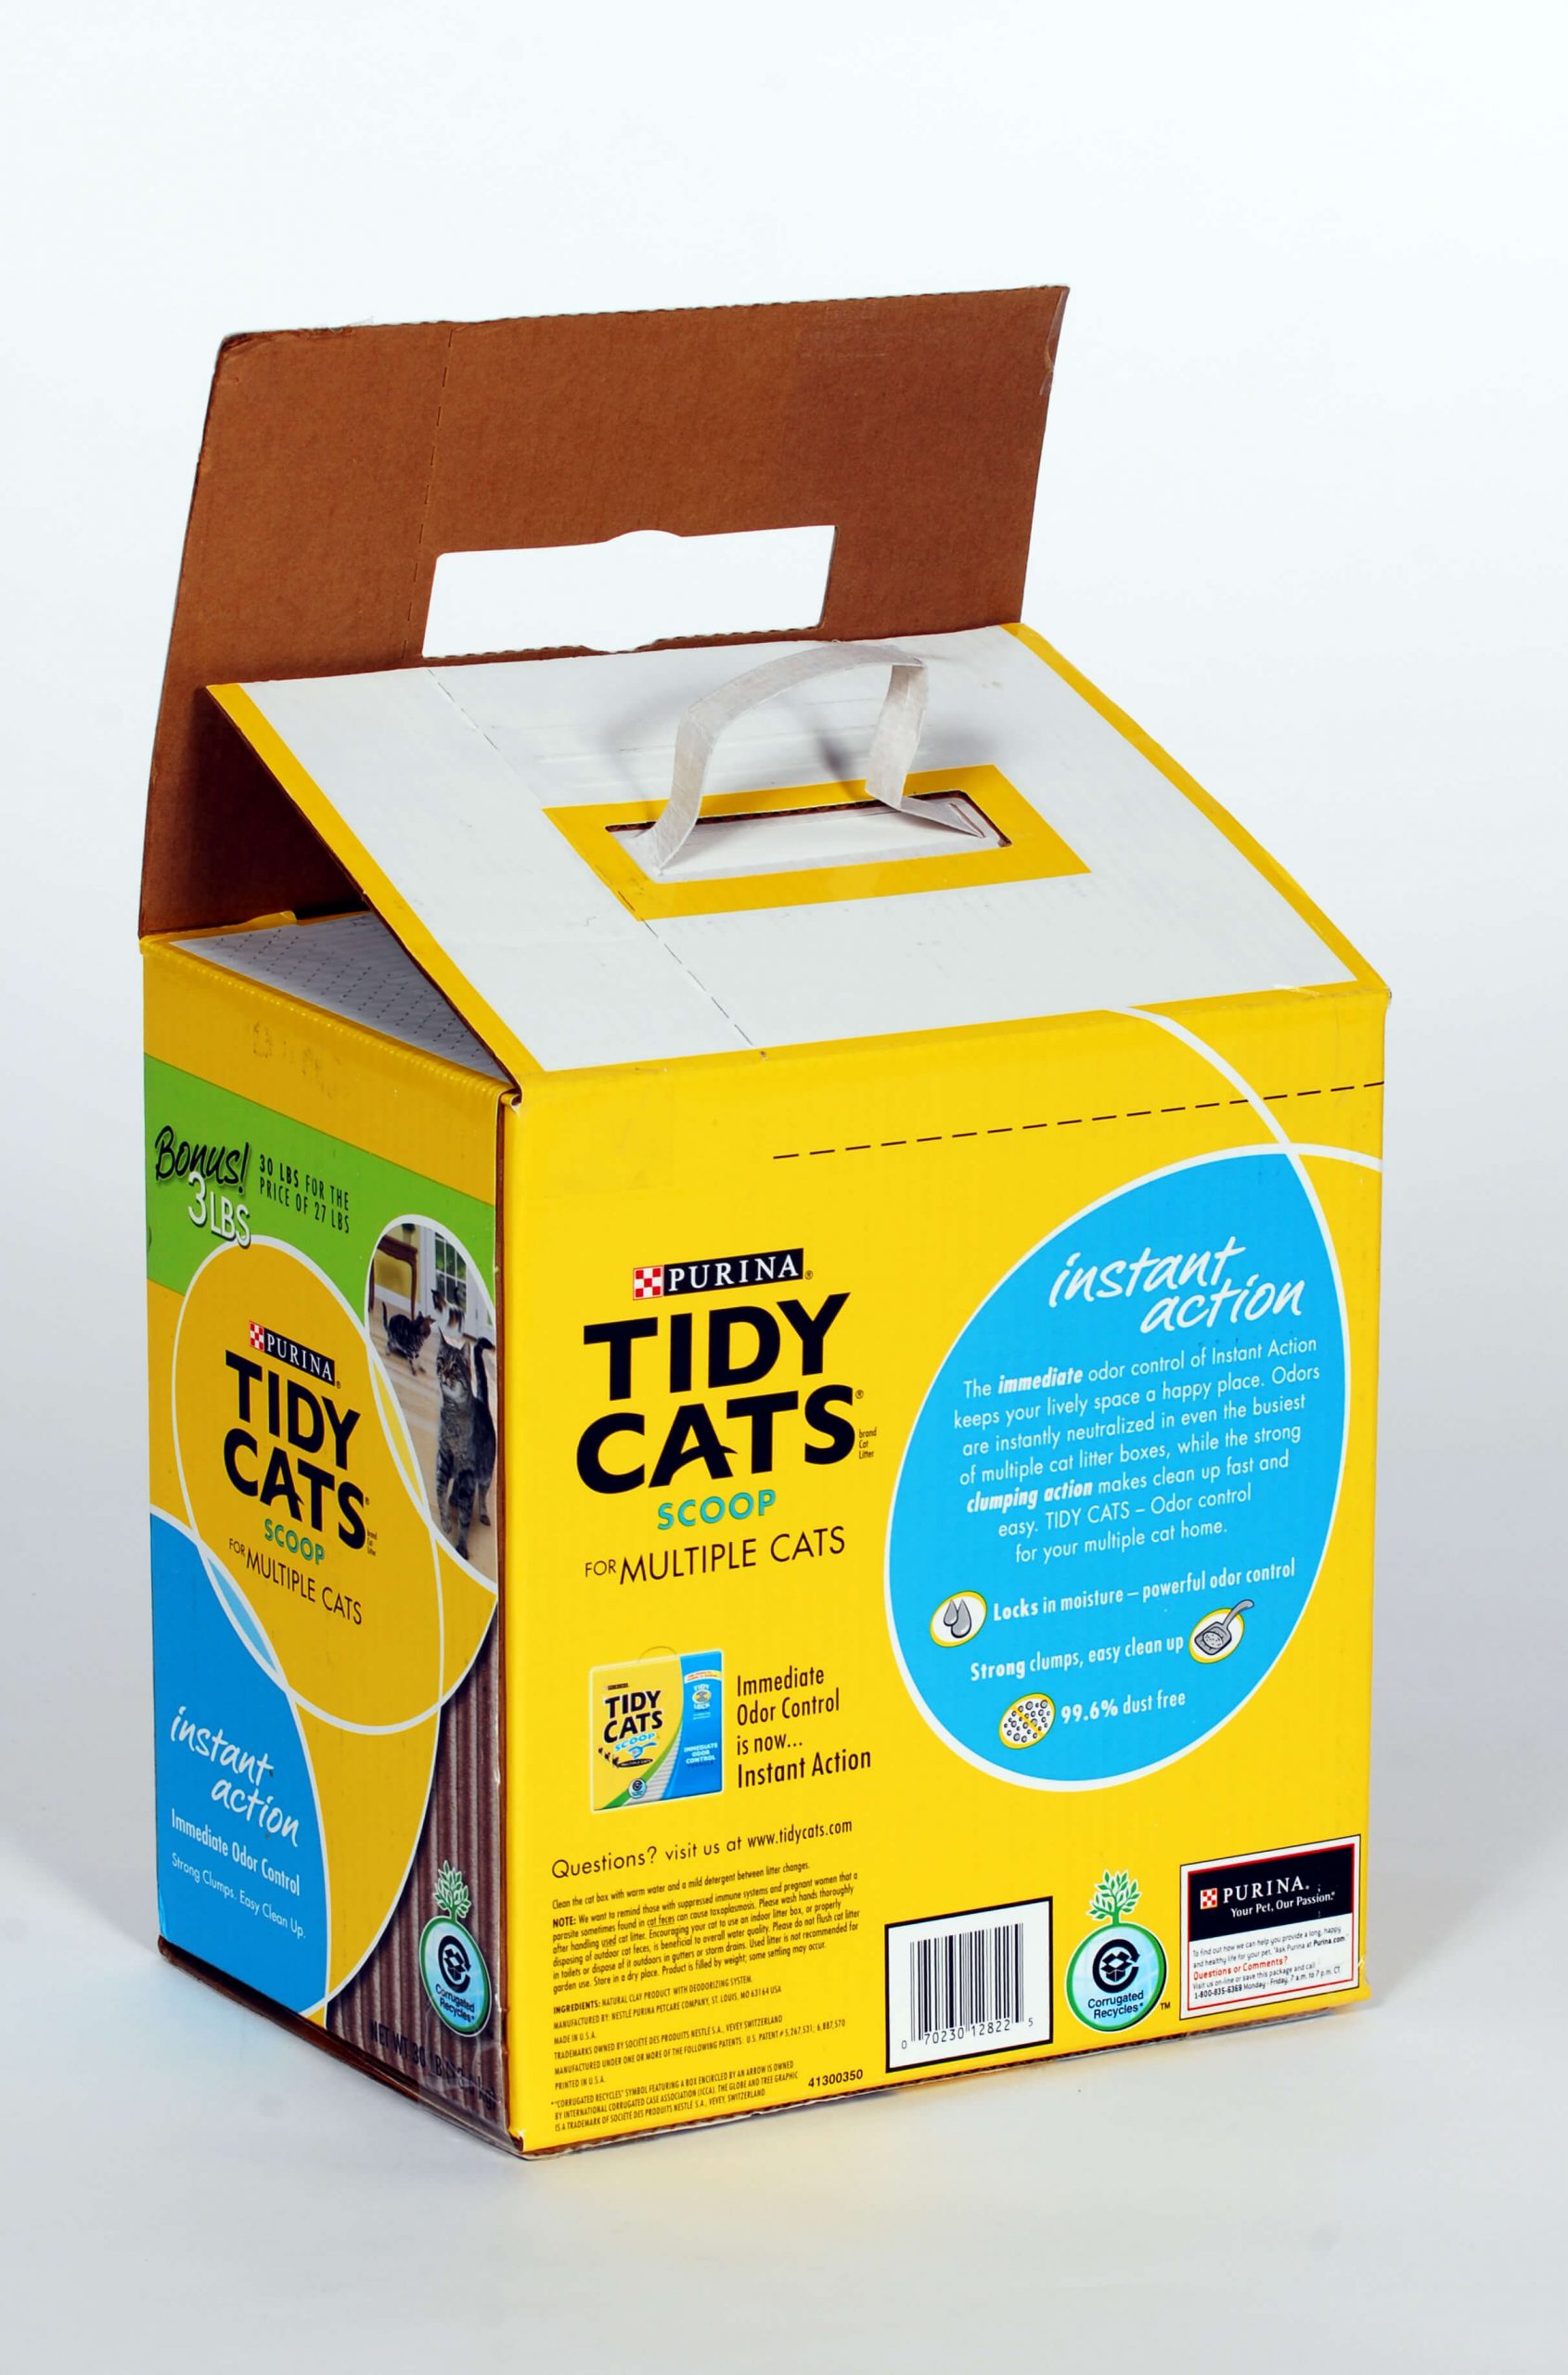 Tidy Cats branded packaging